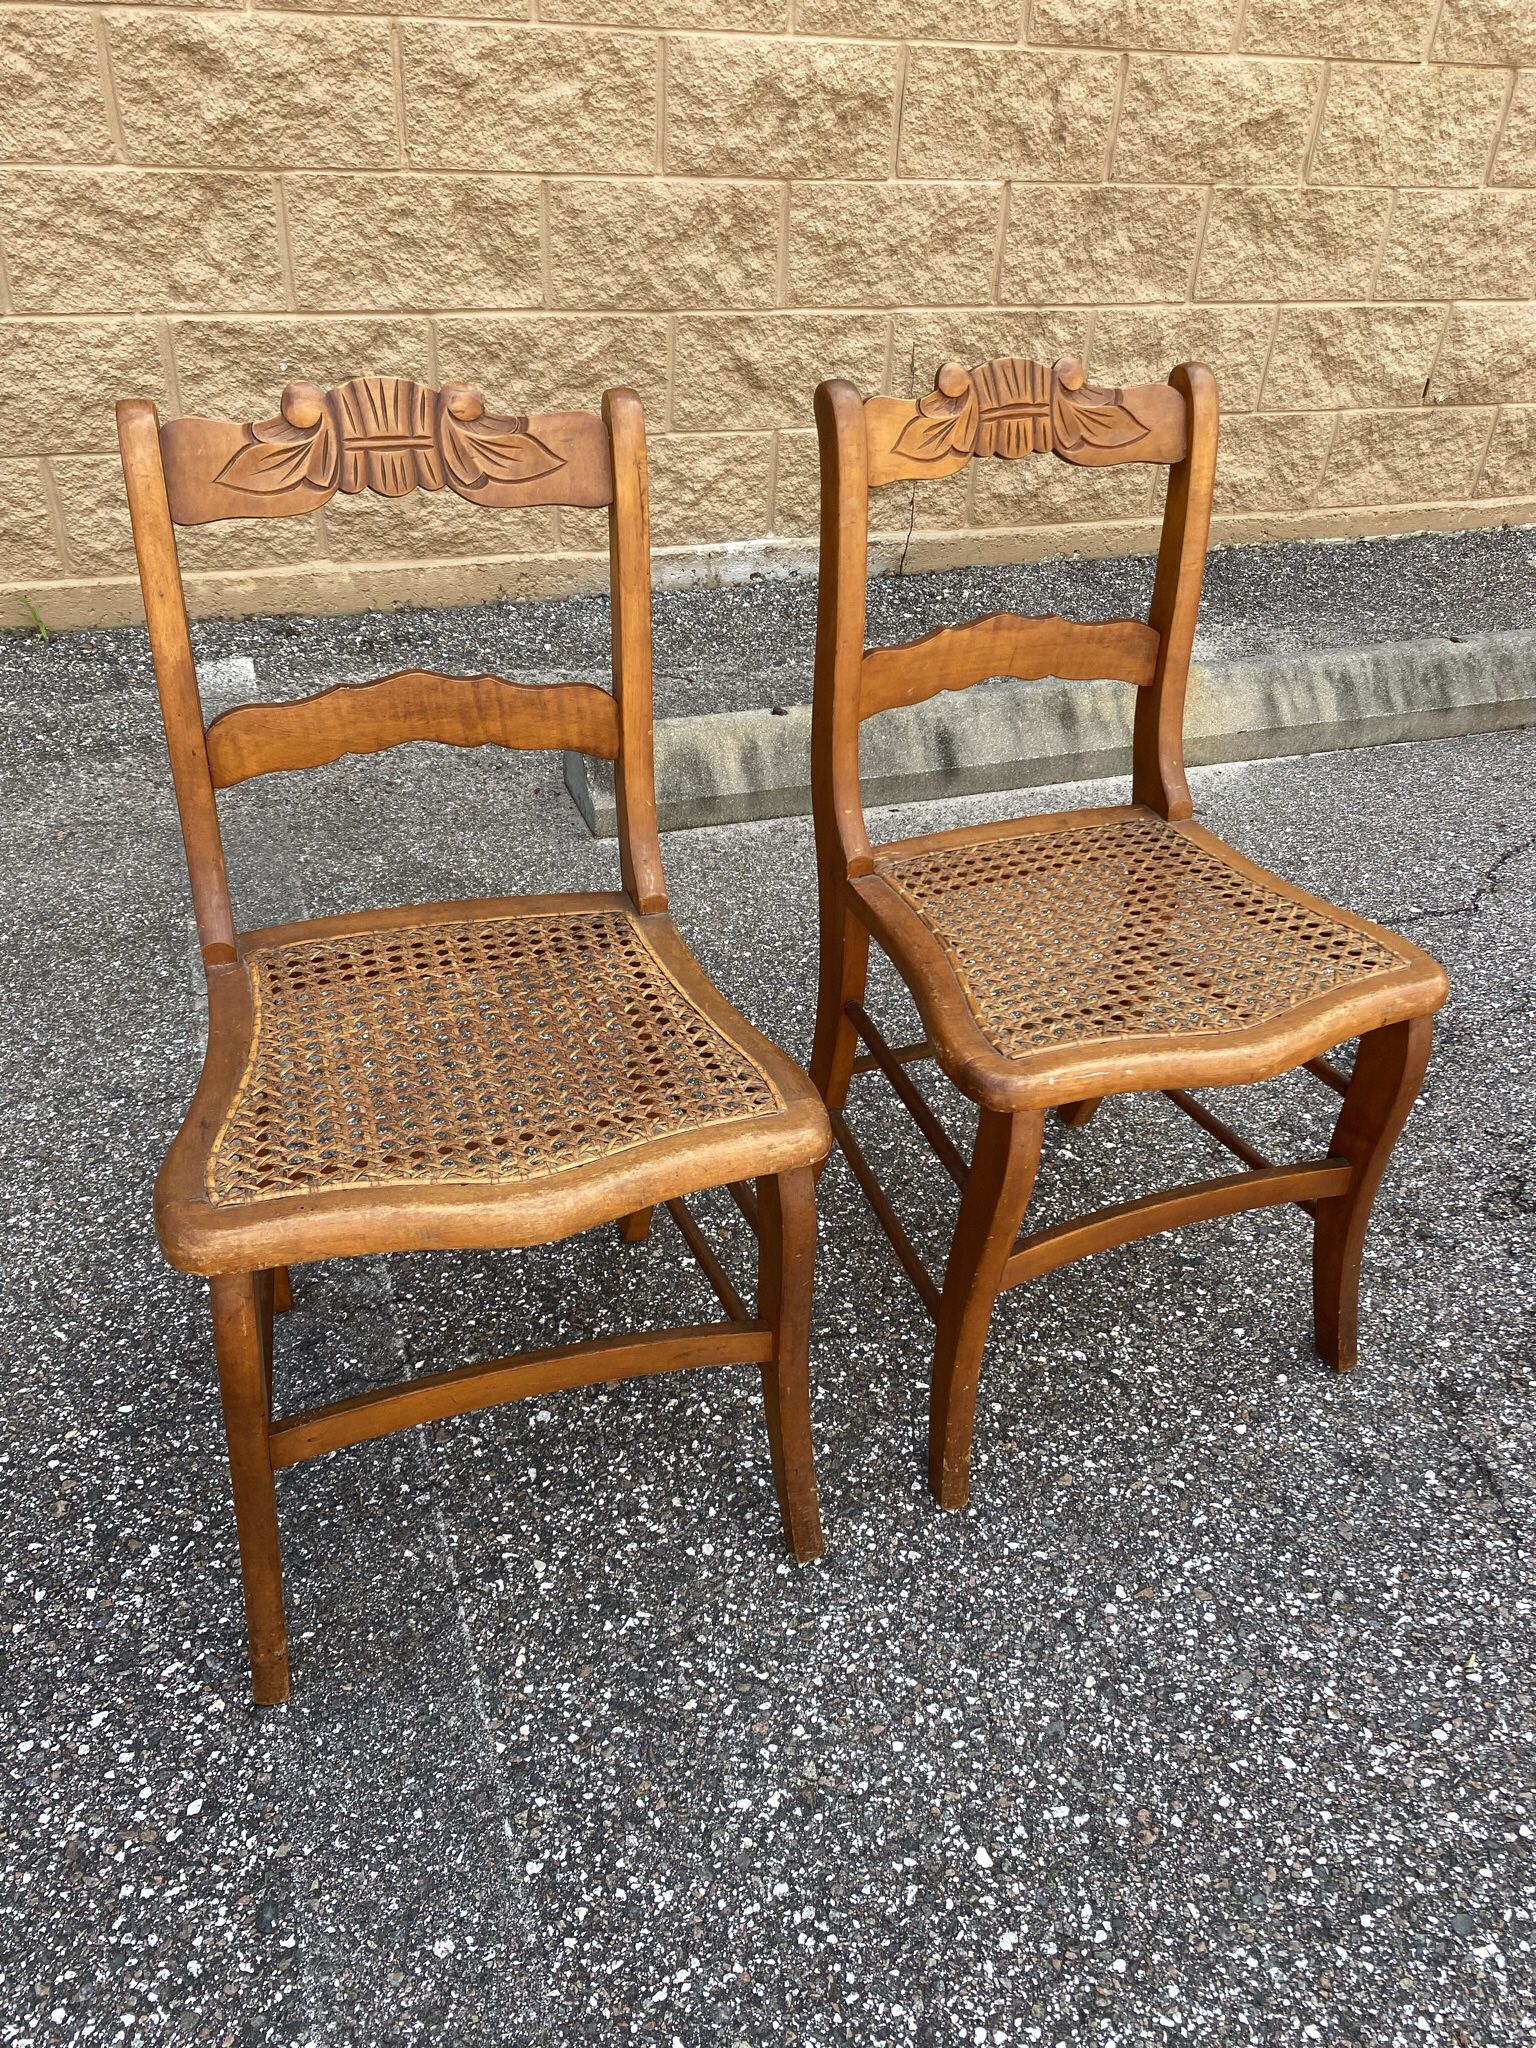 Antique Cane Chairs 